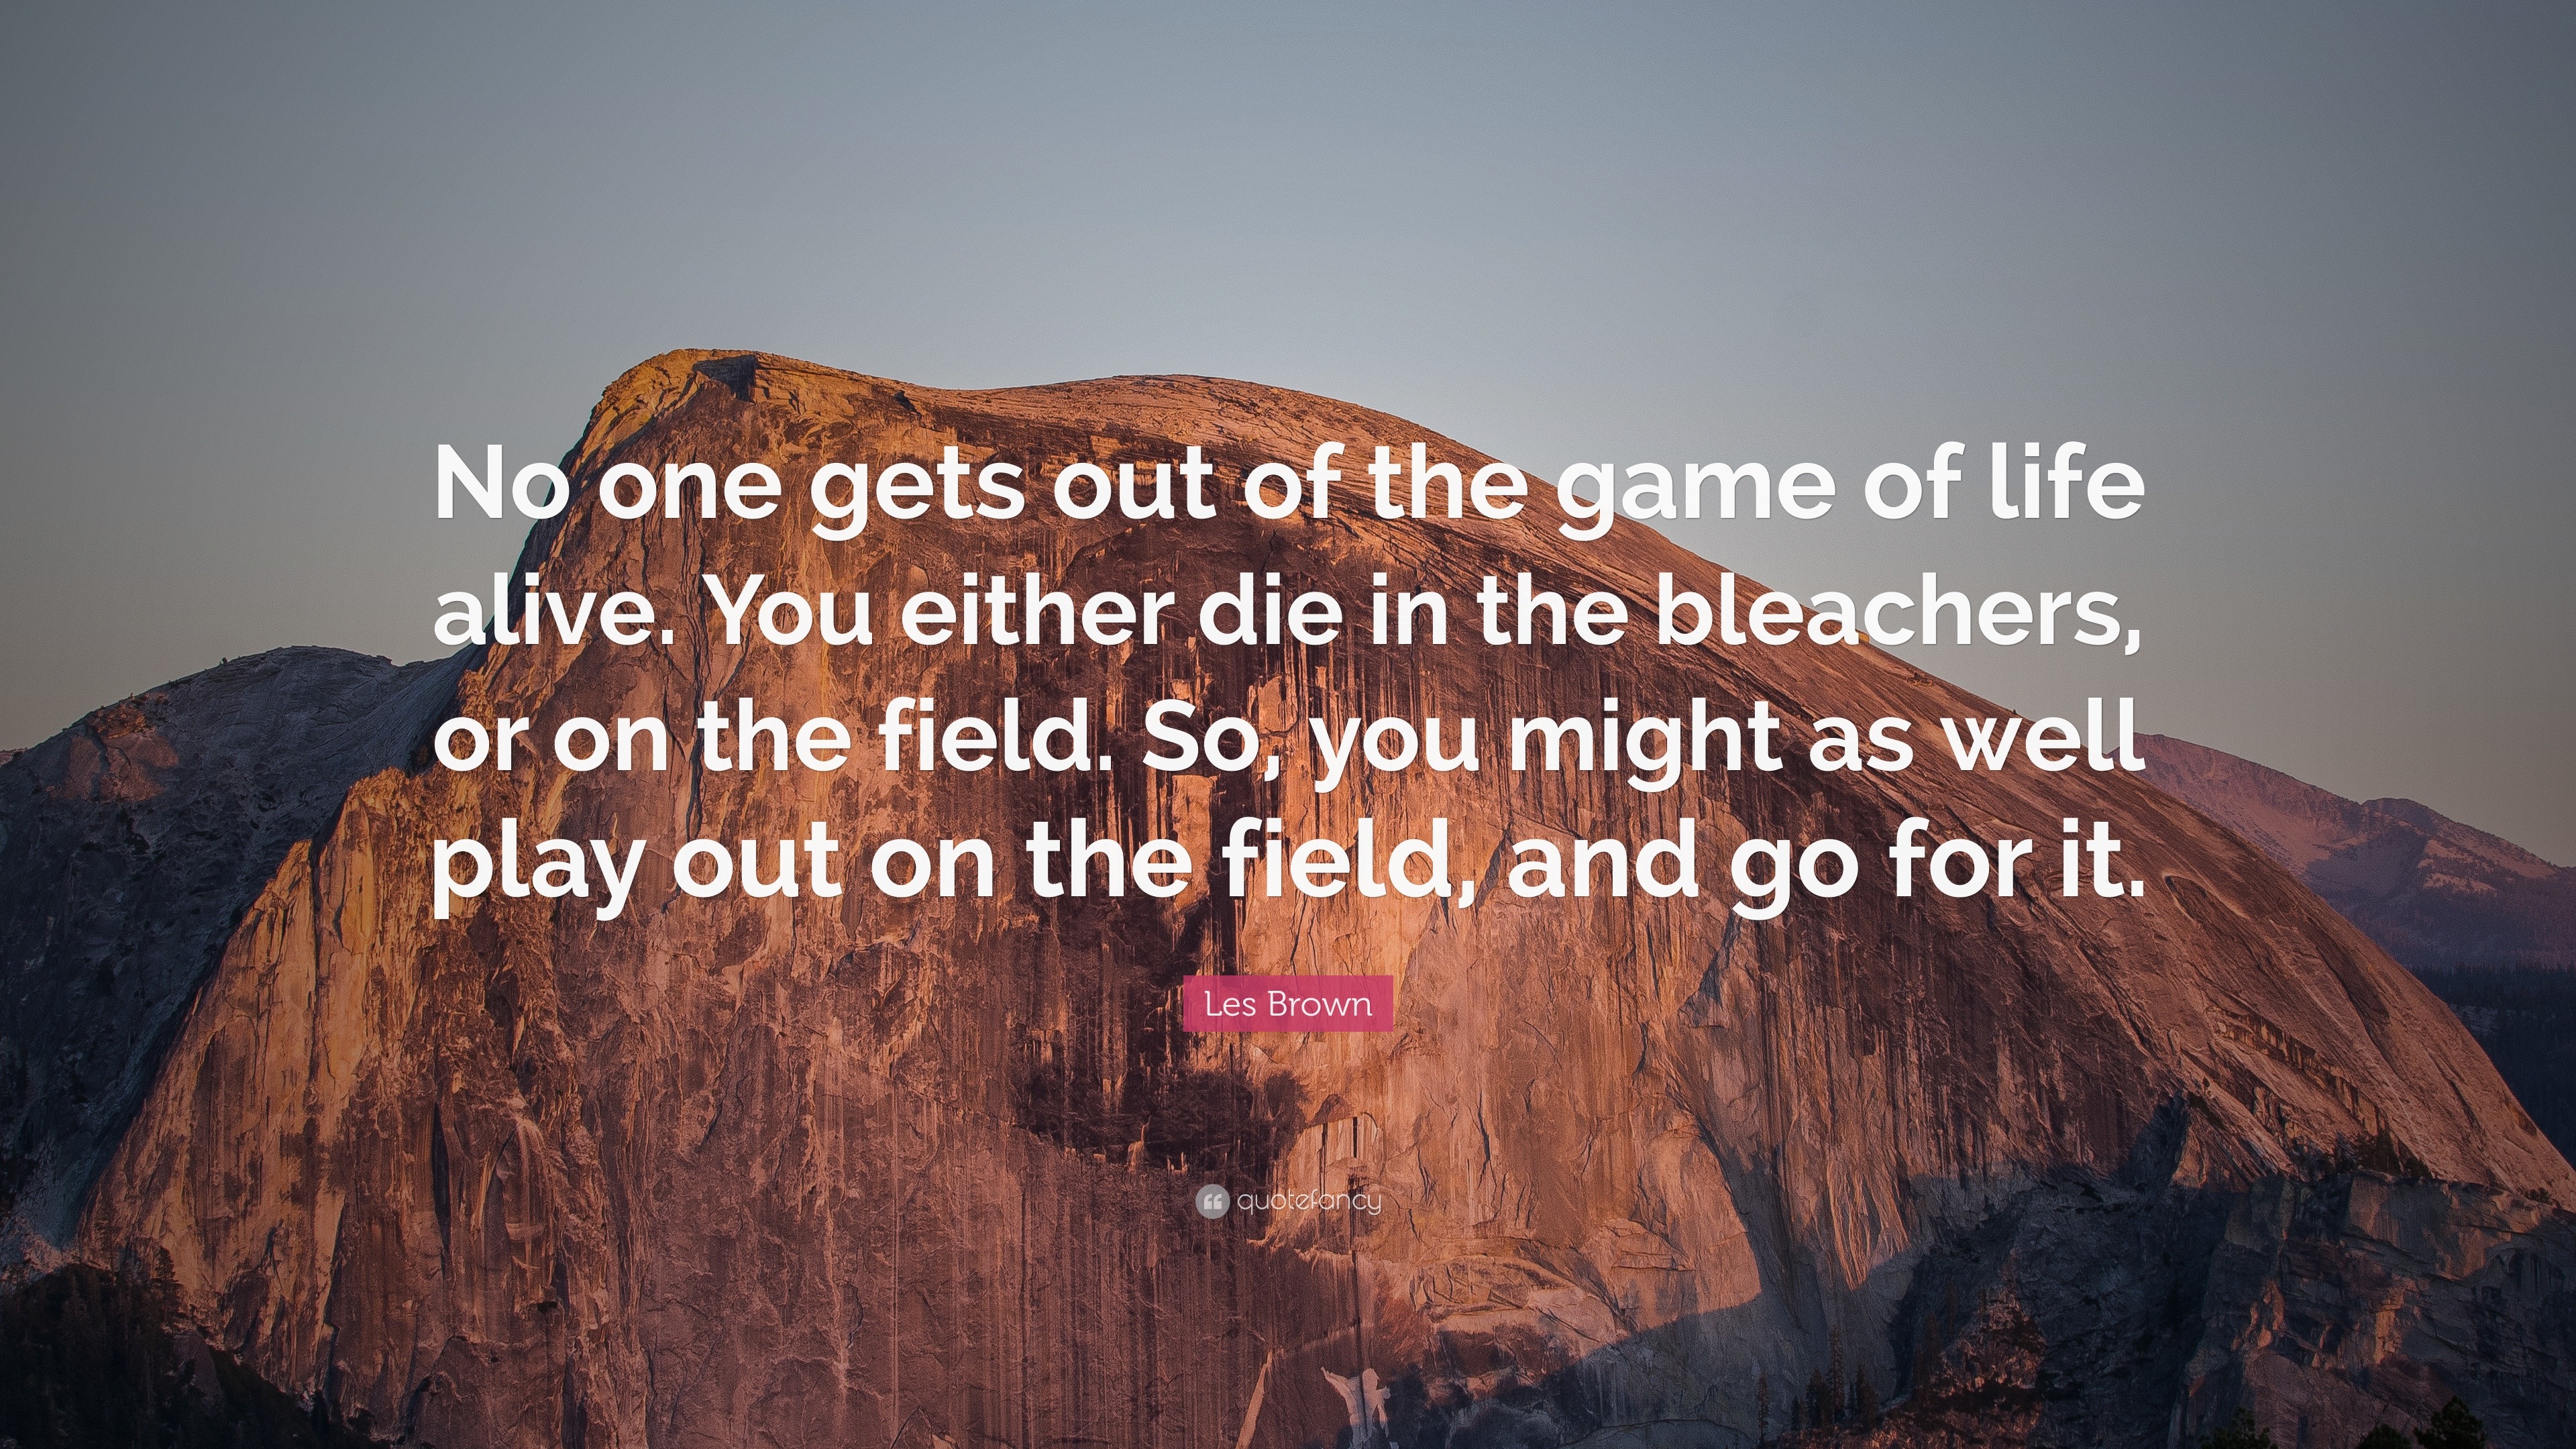 Les Brown Quote: "No one gets out of the game of life alive. You either die in the bleachers, or ...